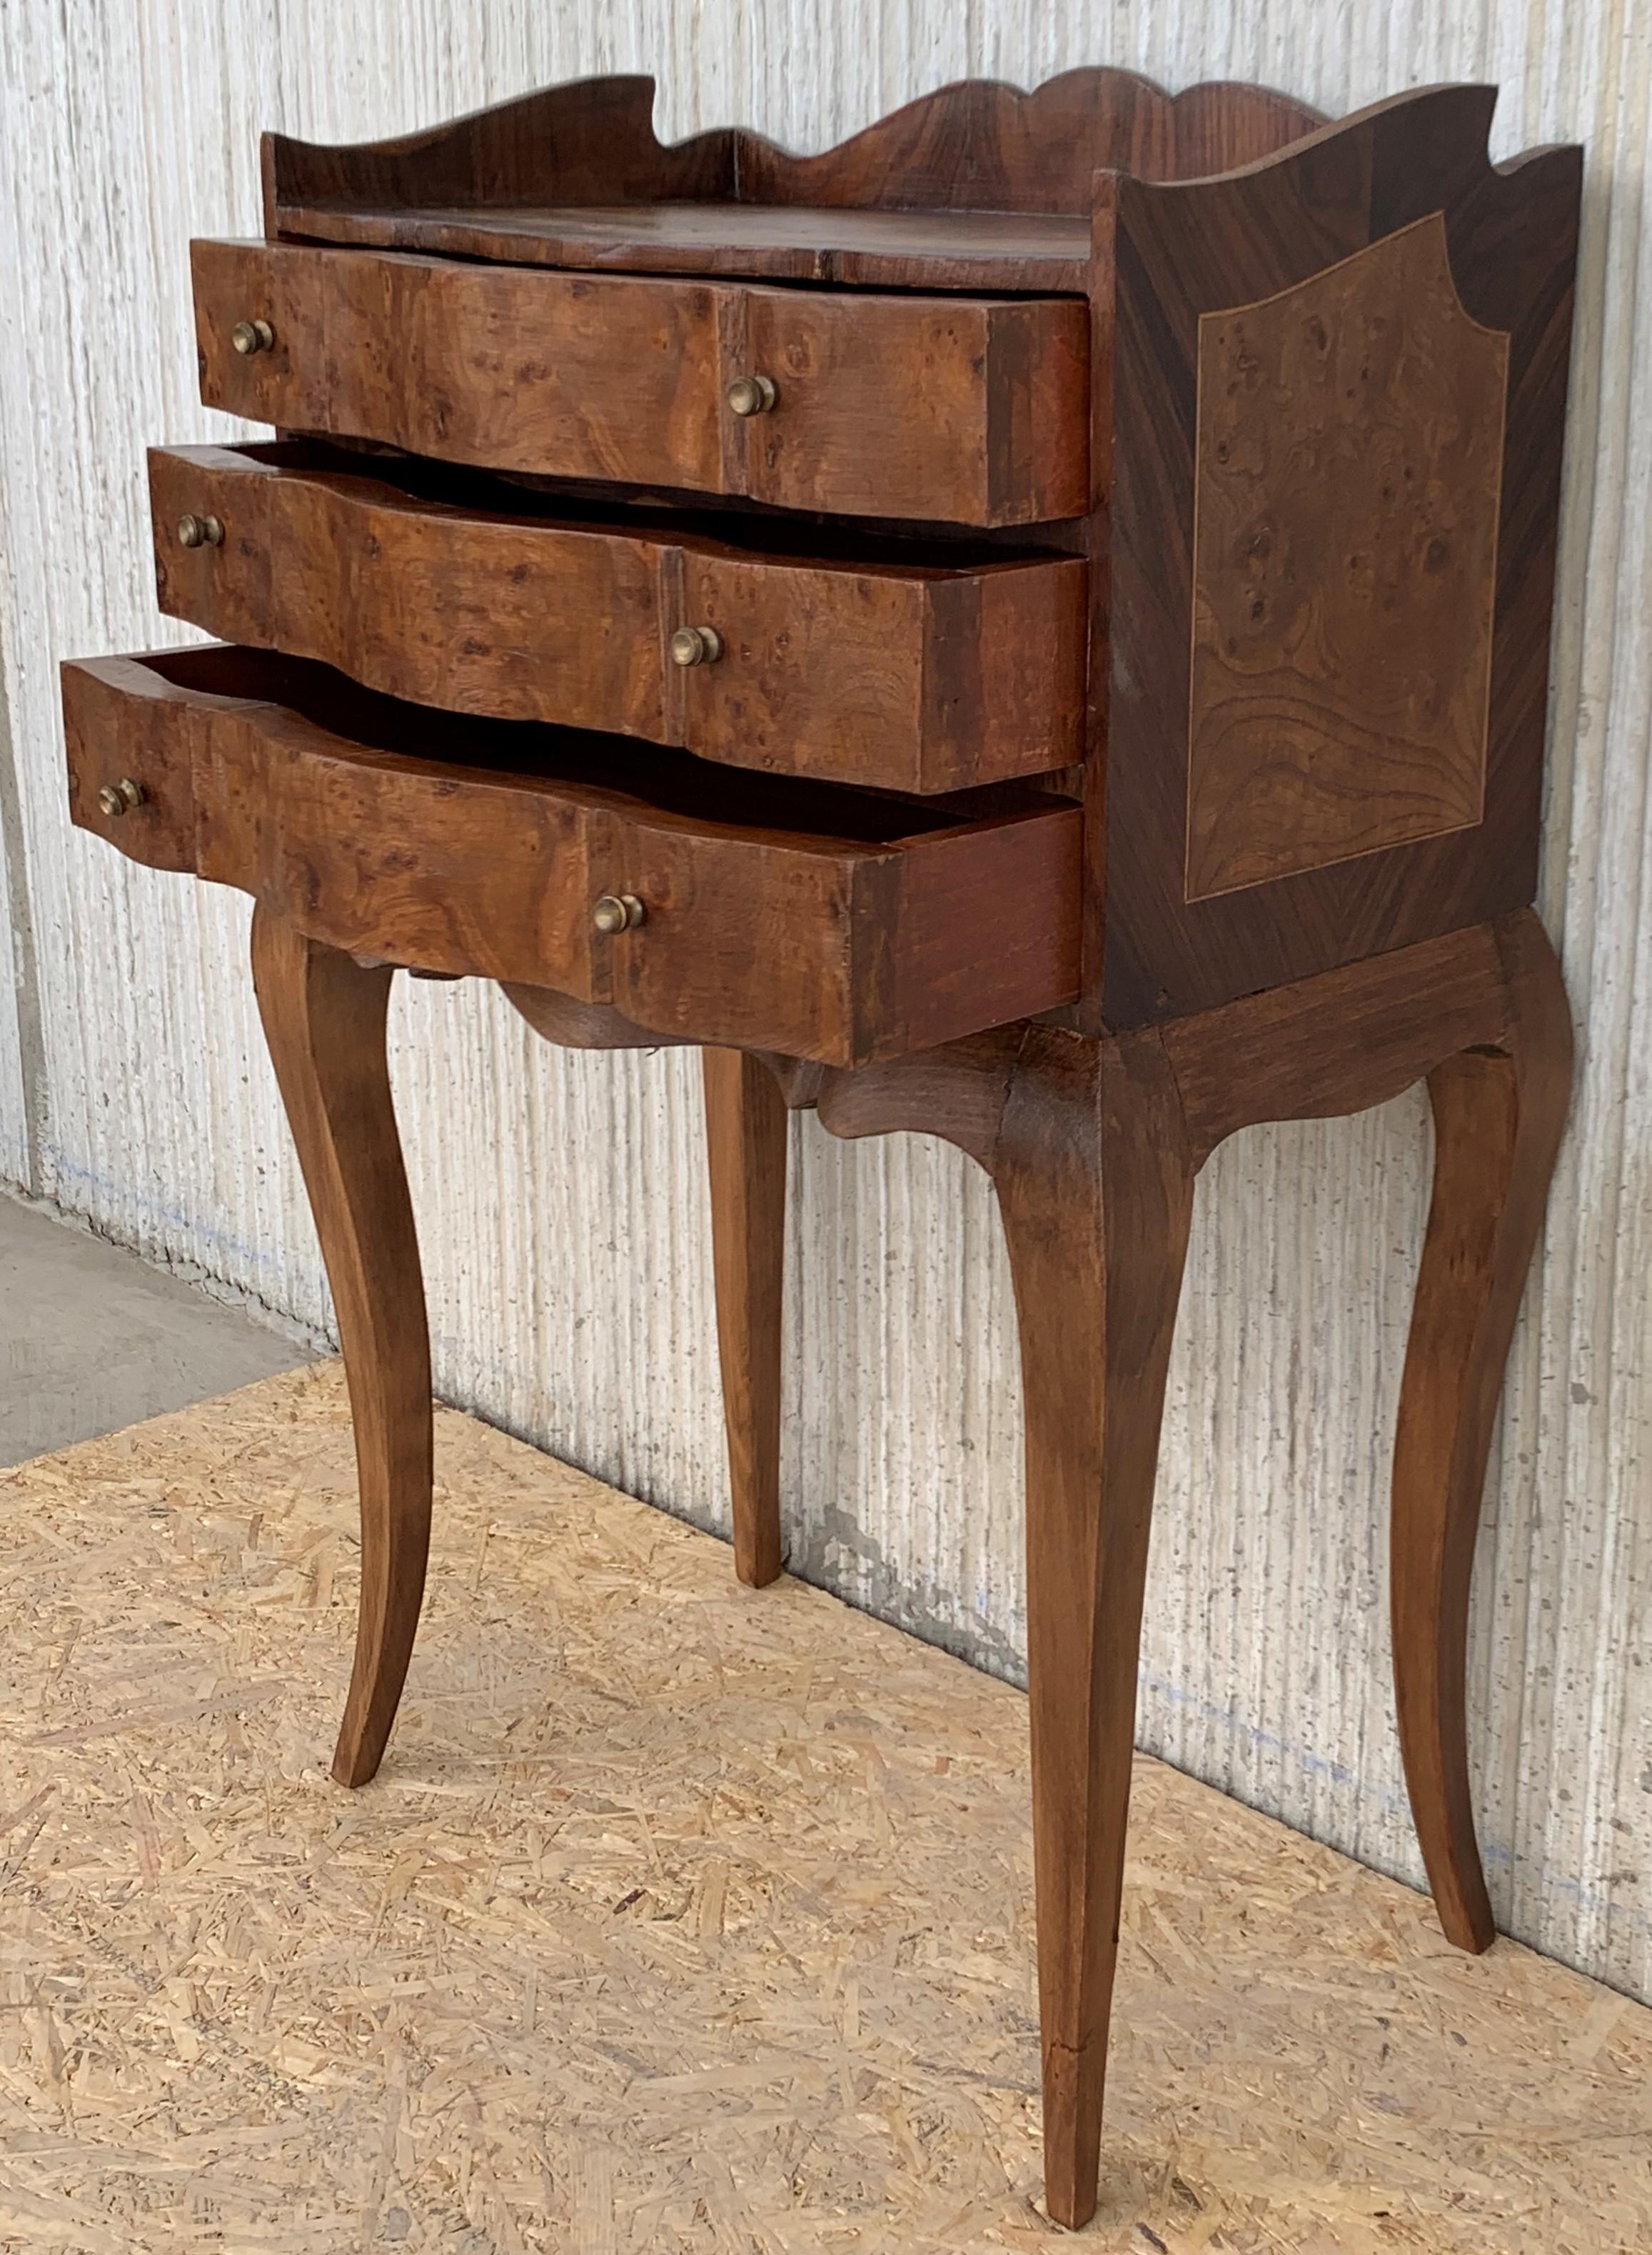 19th Century Pair of French Louis XV Style Walnut Bedside Tables with Drawers